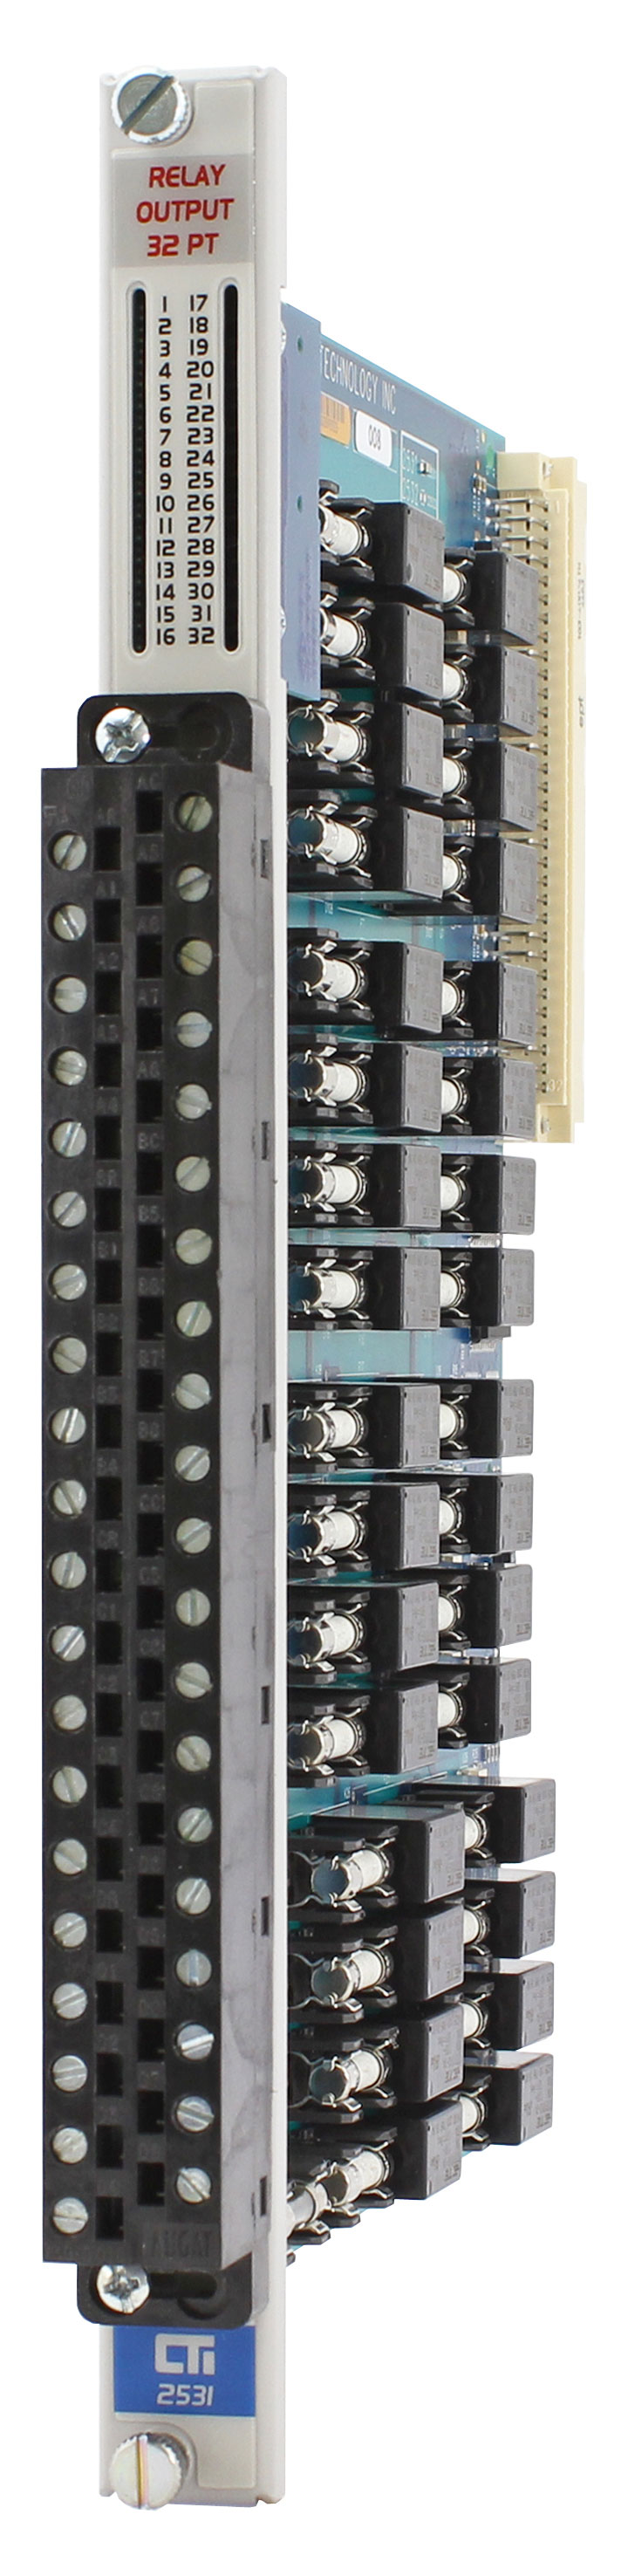 2531 32-Point Form-A Relay Output Module